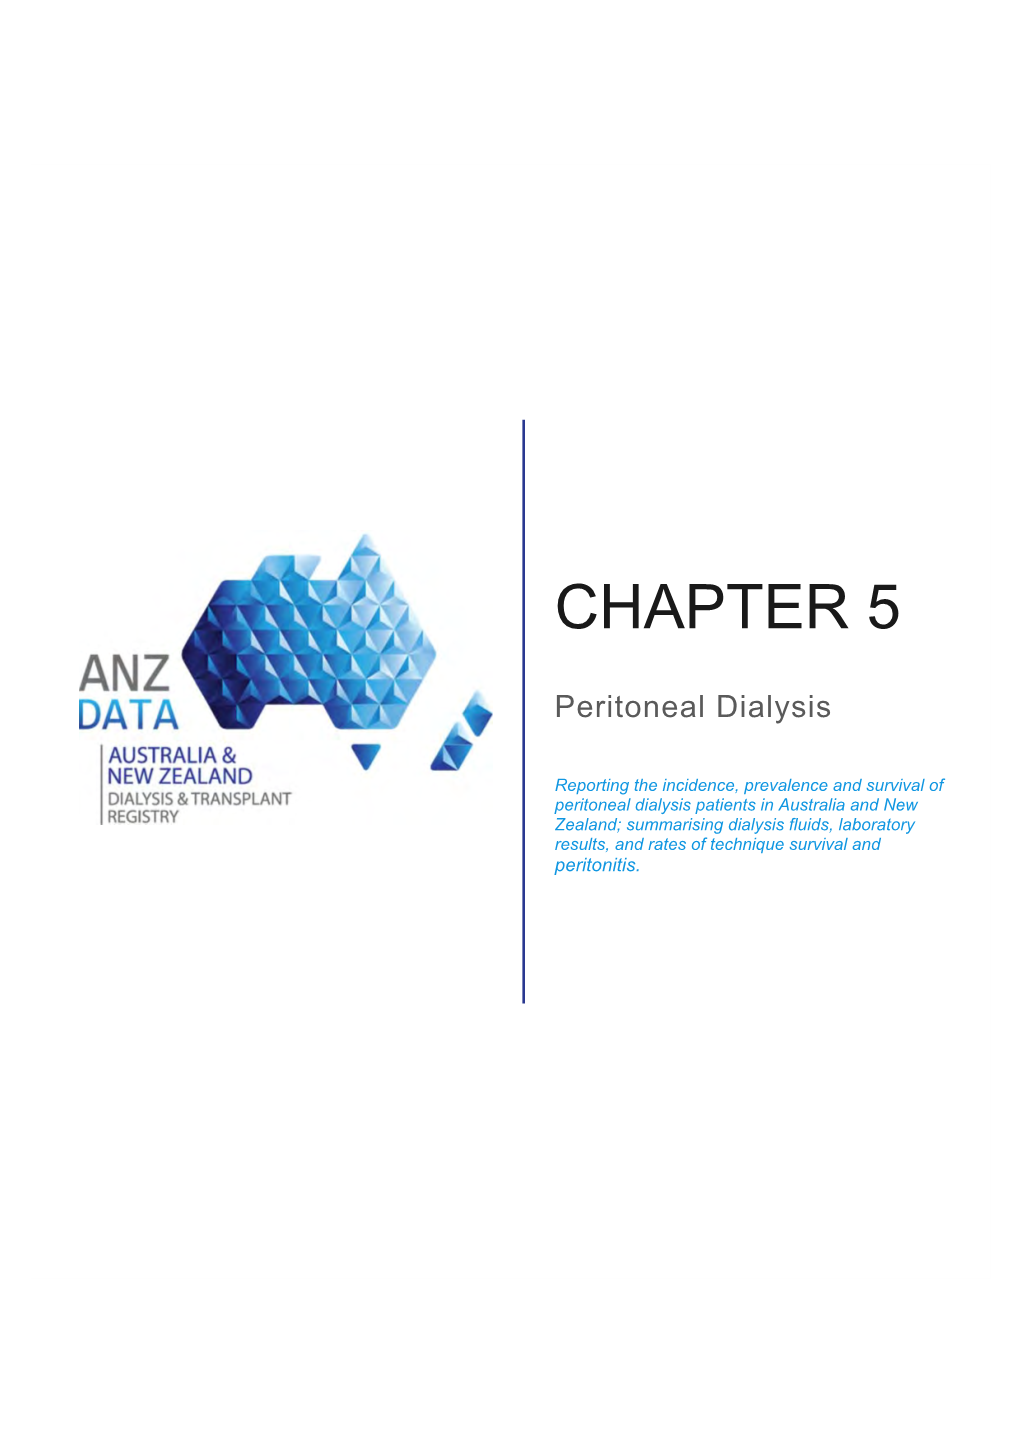 Peritoneal Dialysis Chapter 5 ANZDATA Annual Report